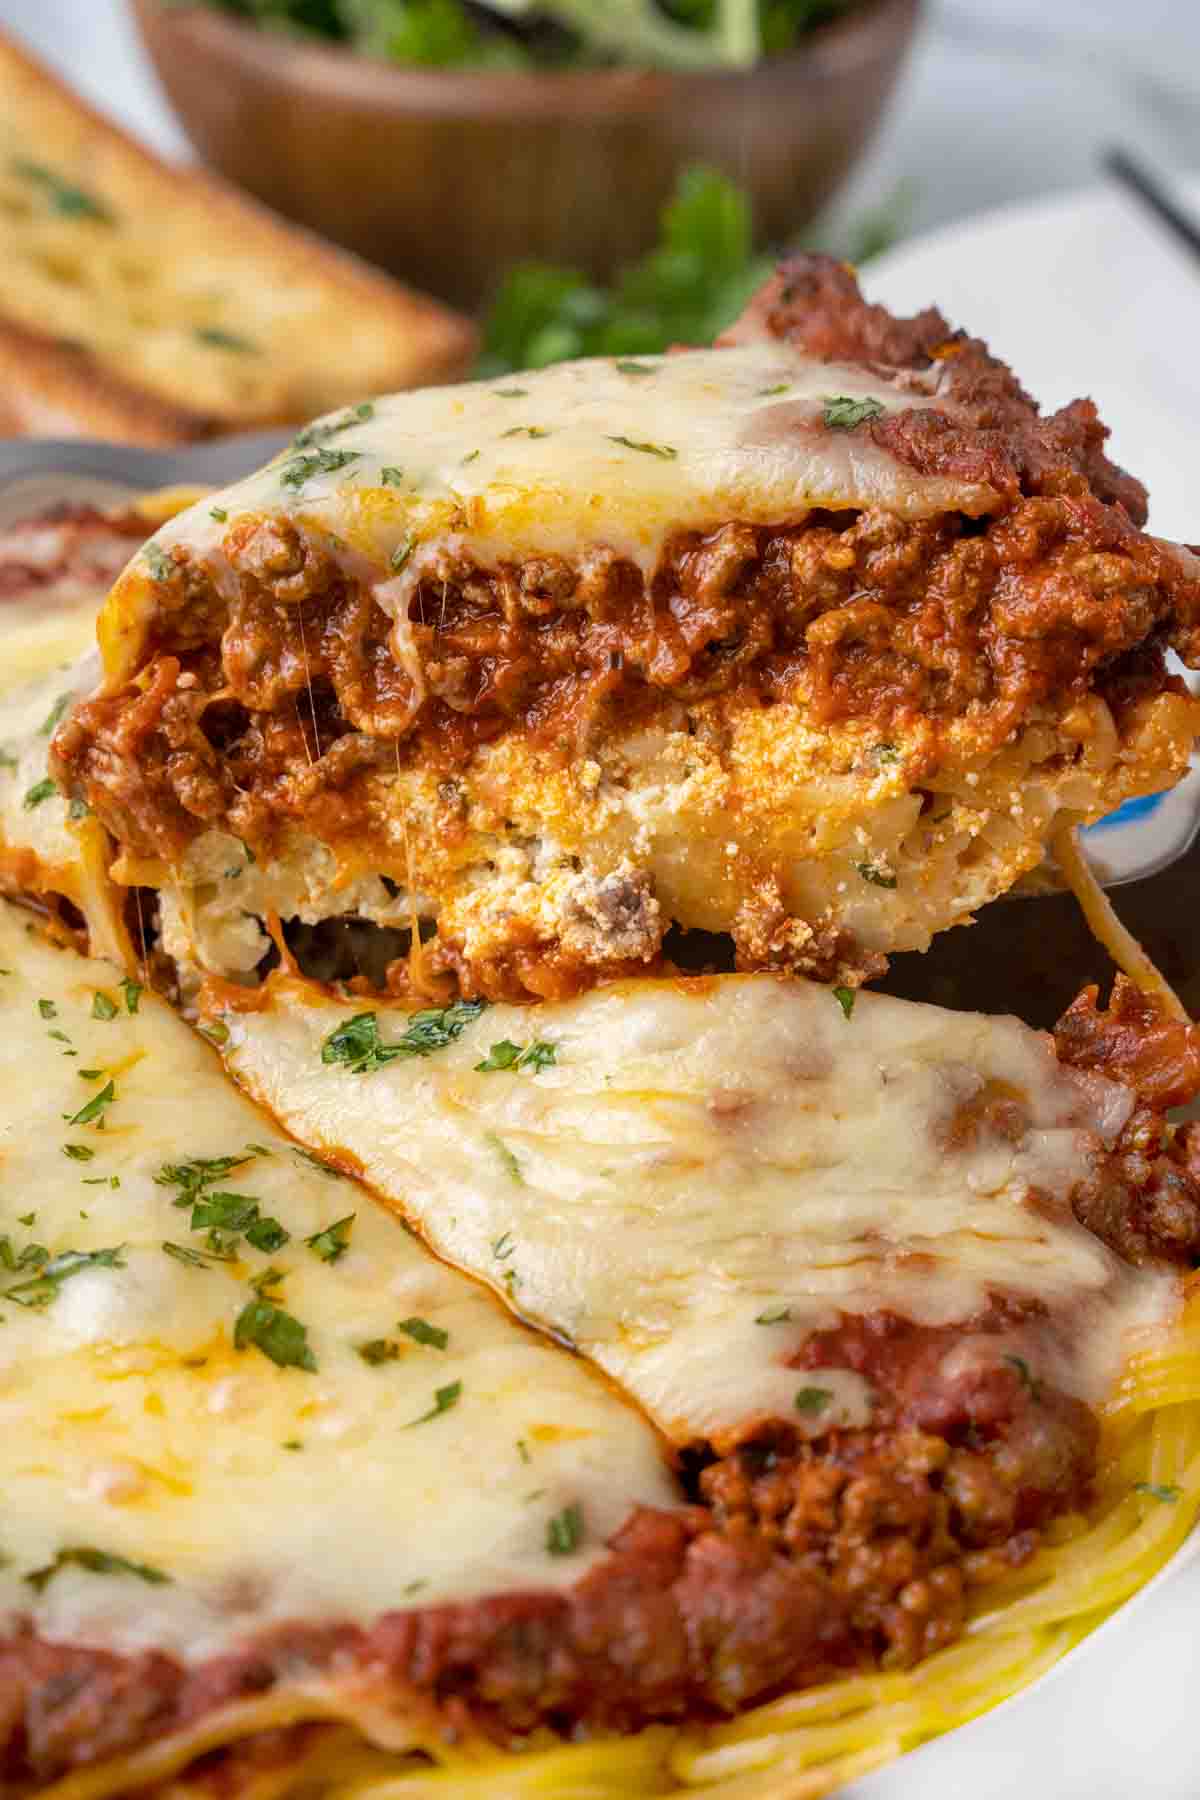 Slice of spaghetti pie on a spatula being taken out of the whole pie.